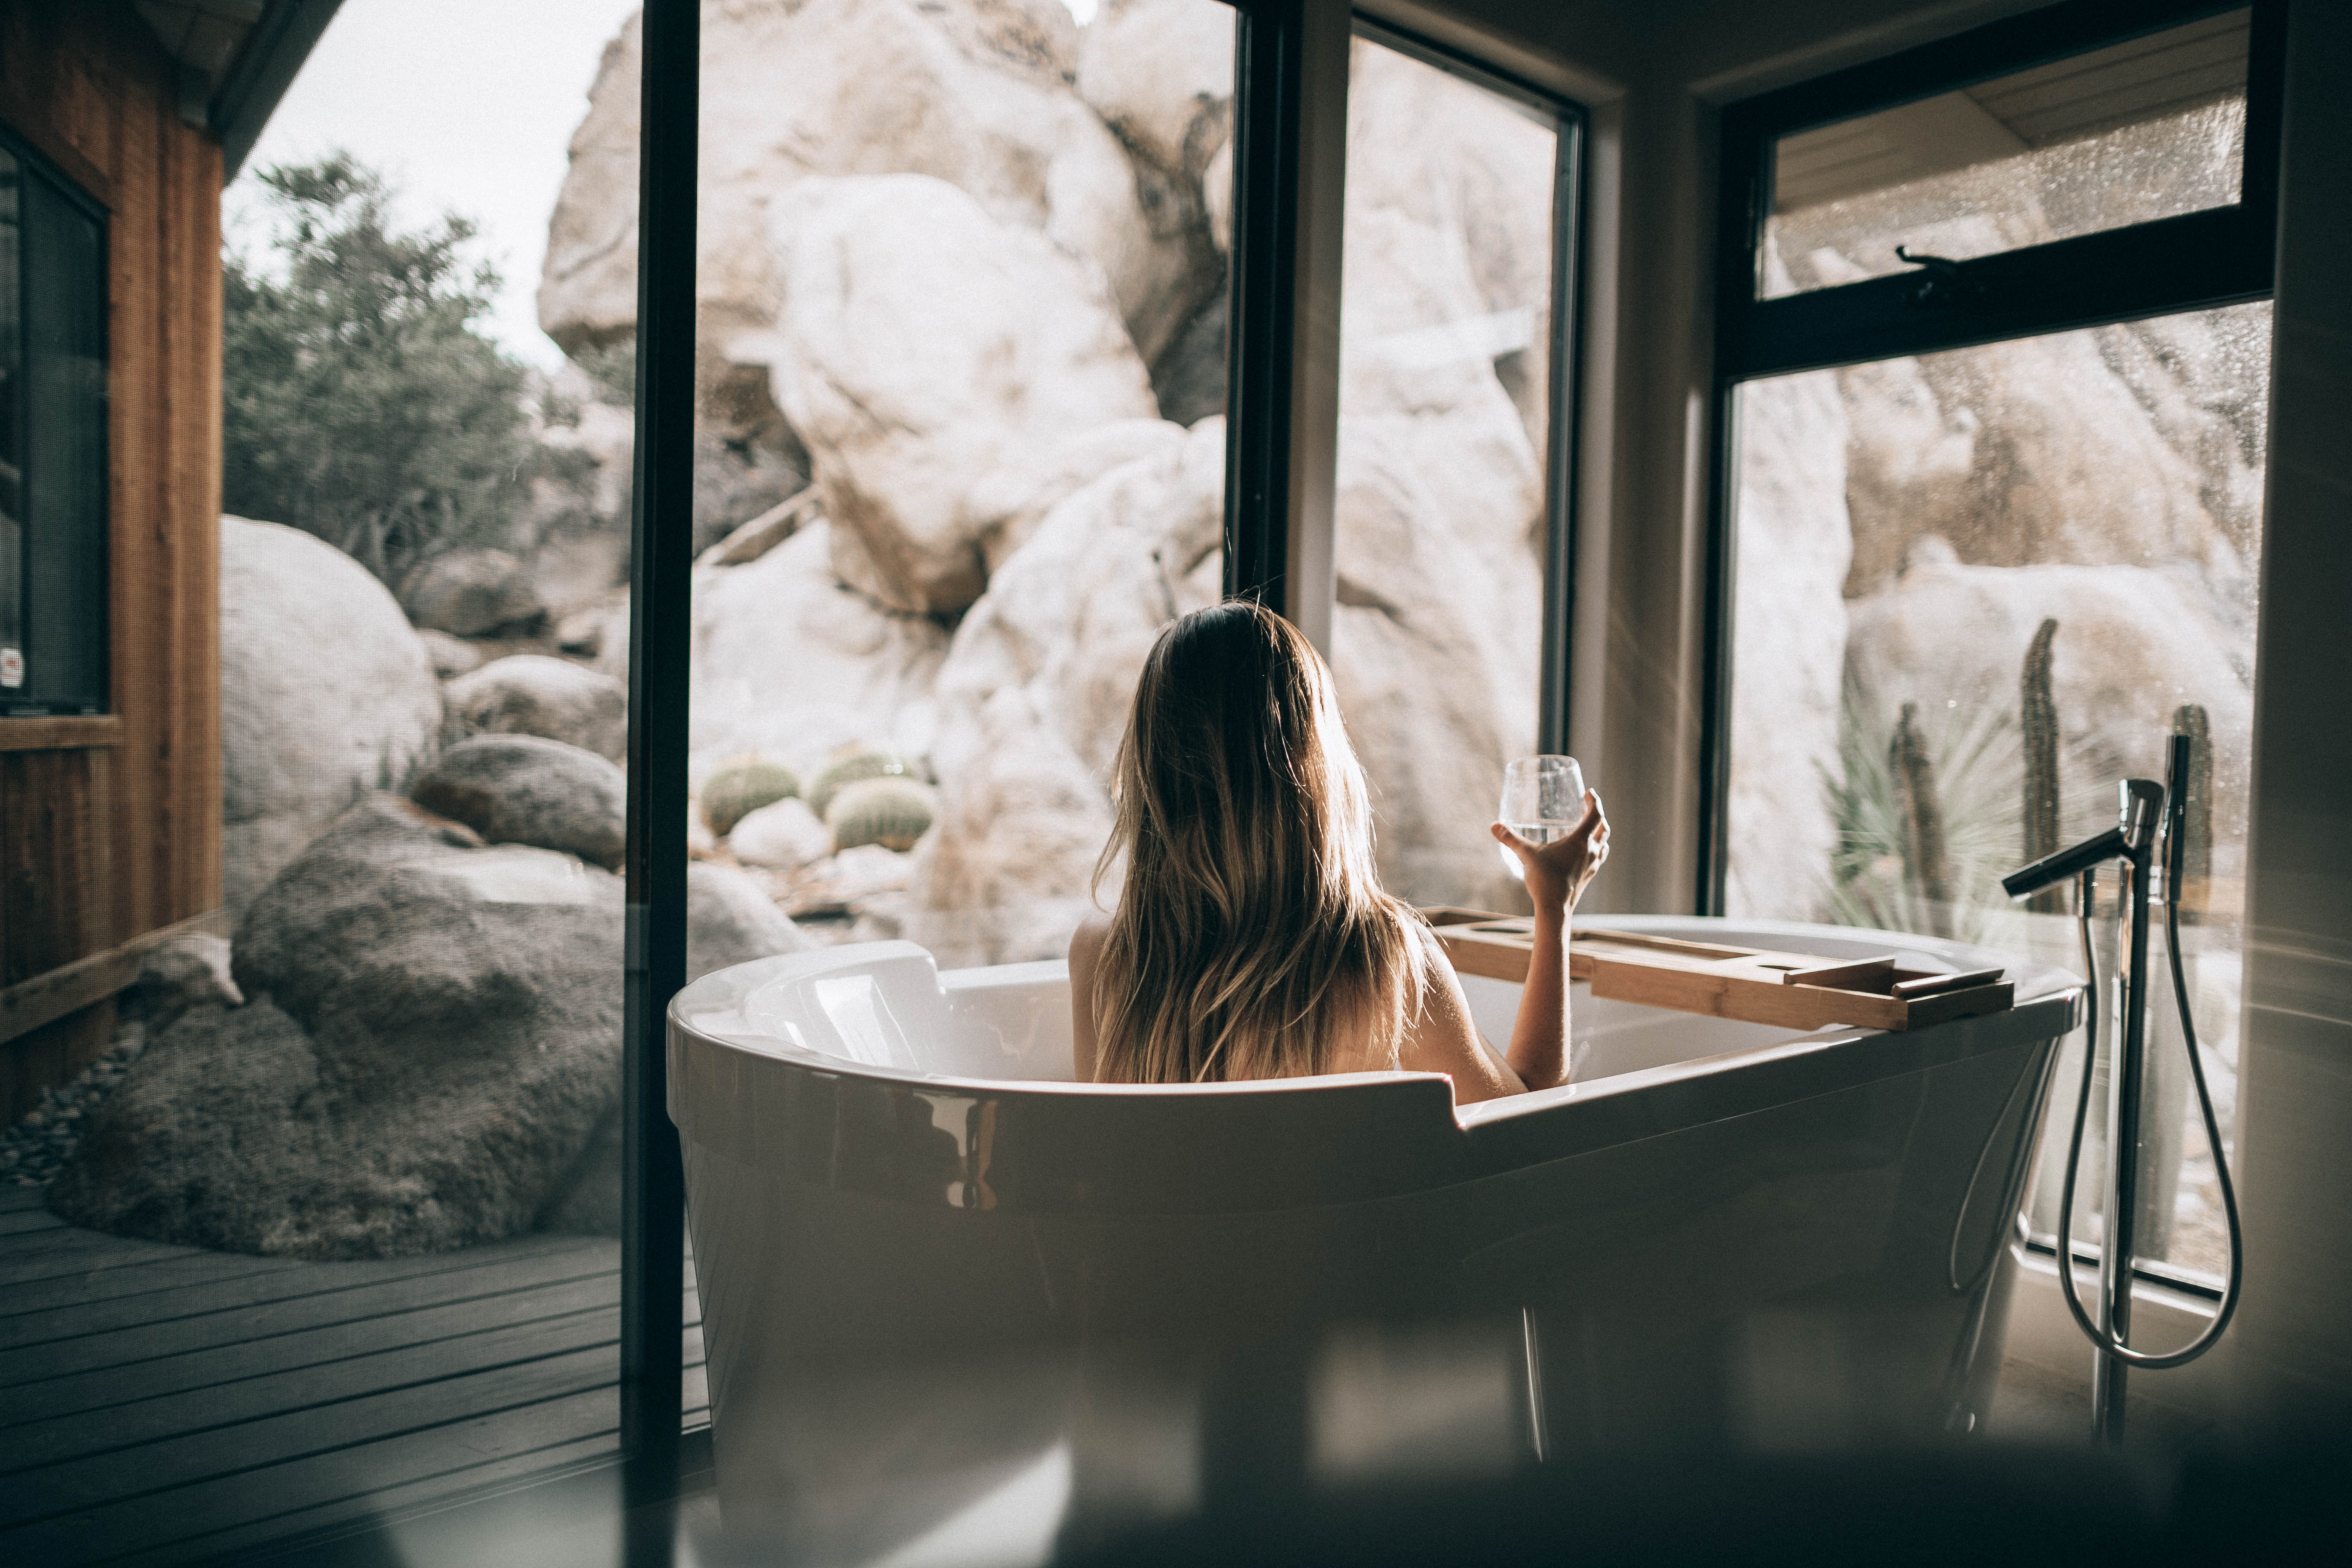 Young Woman Enjoying a Glass of Wine in a Modern Bathtub Overlooking a Peaceful Landscape